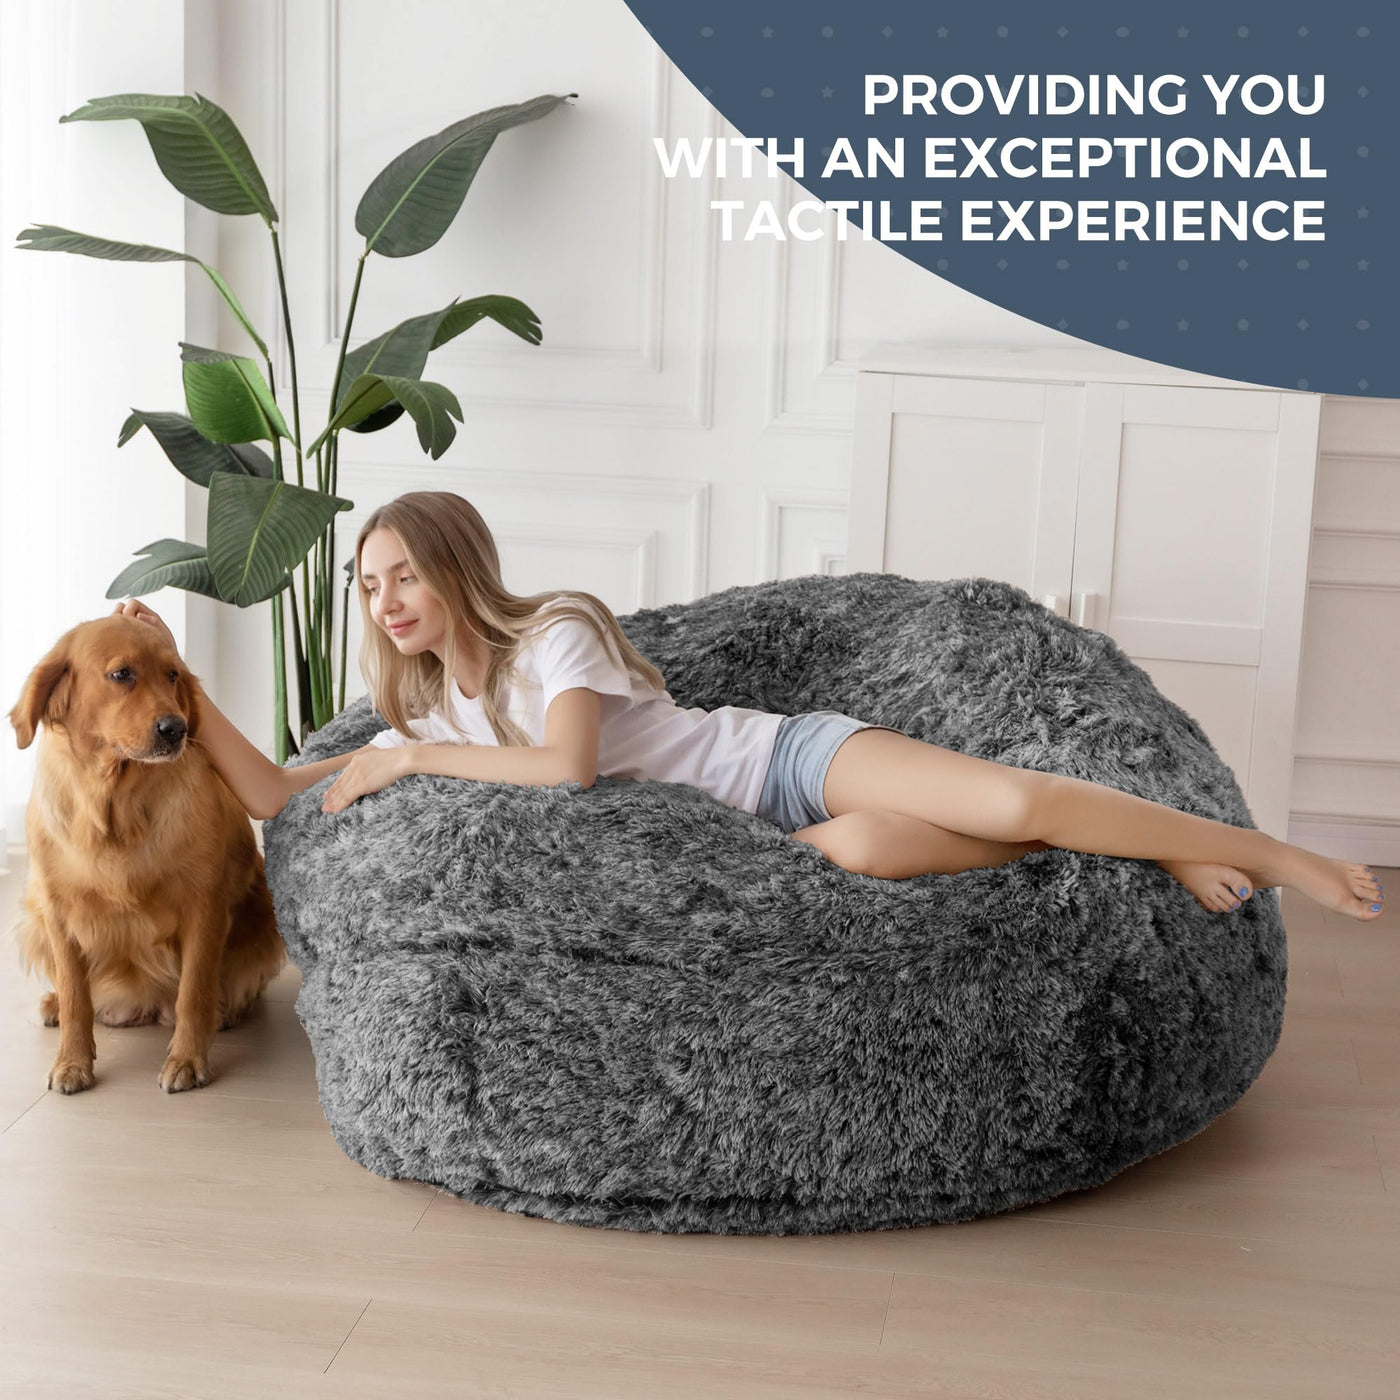 MAXYOYO Giant Bean Bag, Faux Fur Convertible Beanbag Folds from Lazy Chair to Floor Mattress Bed, Black